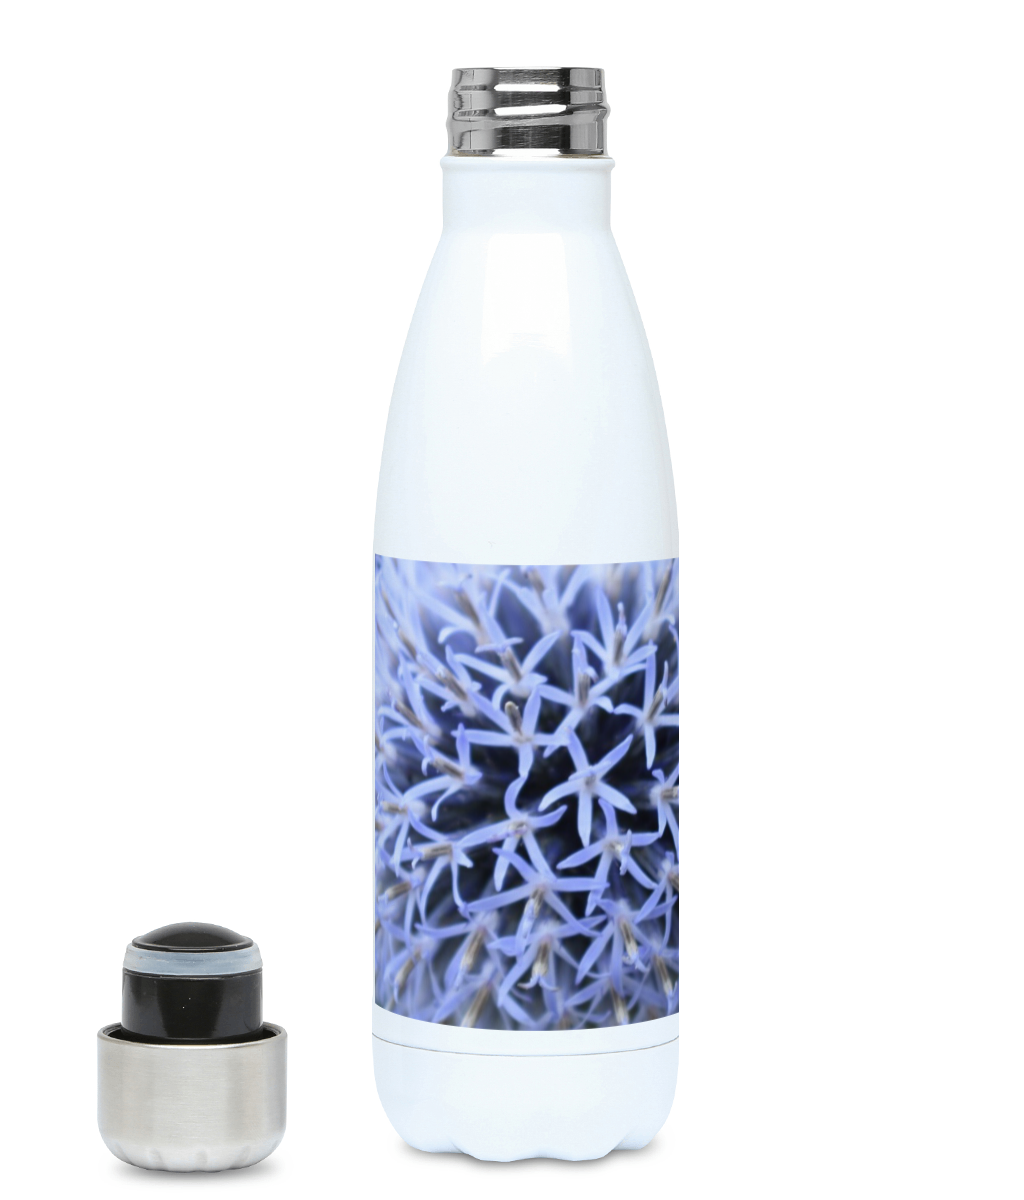 "The Blue Maze Circle" Blue Flower 500ml Water Bottle - Nature of Flowers